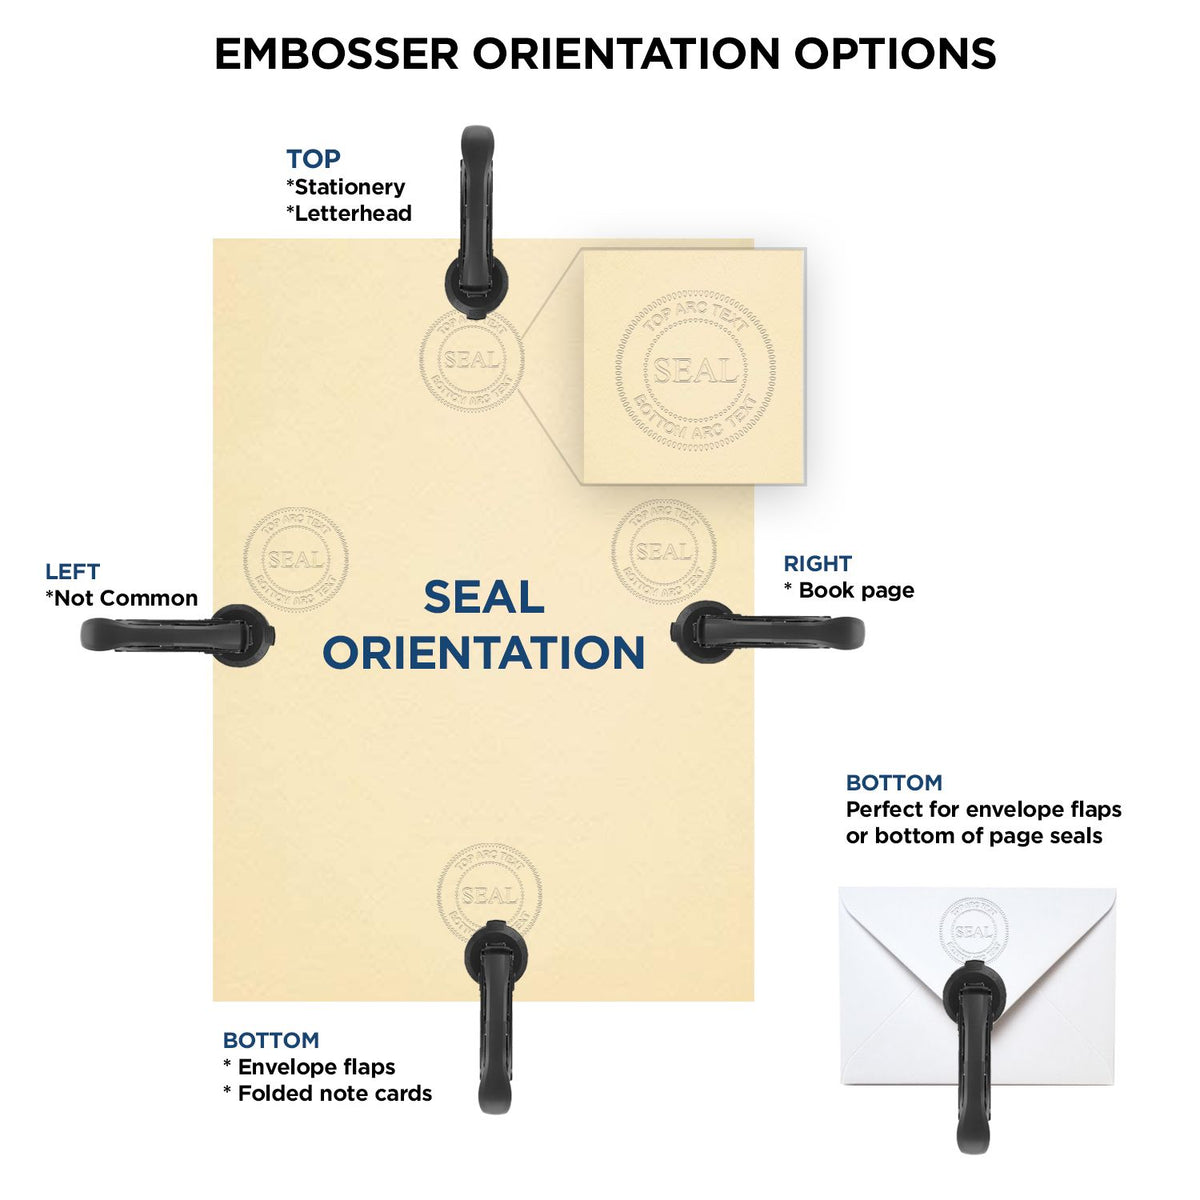 An infographic for the Heavy Duty Cast Iron Louisiana Land Surveyor Seal Embosser showing embosser orientation, this is showing examples of a top, bottom, right and left insert.